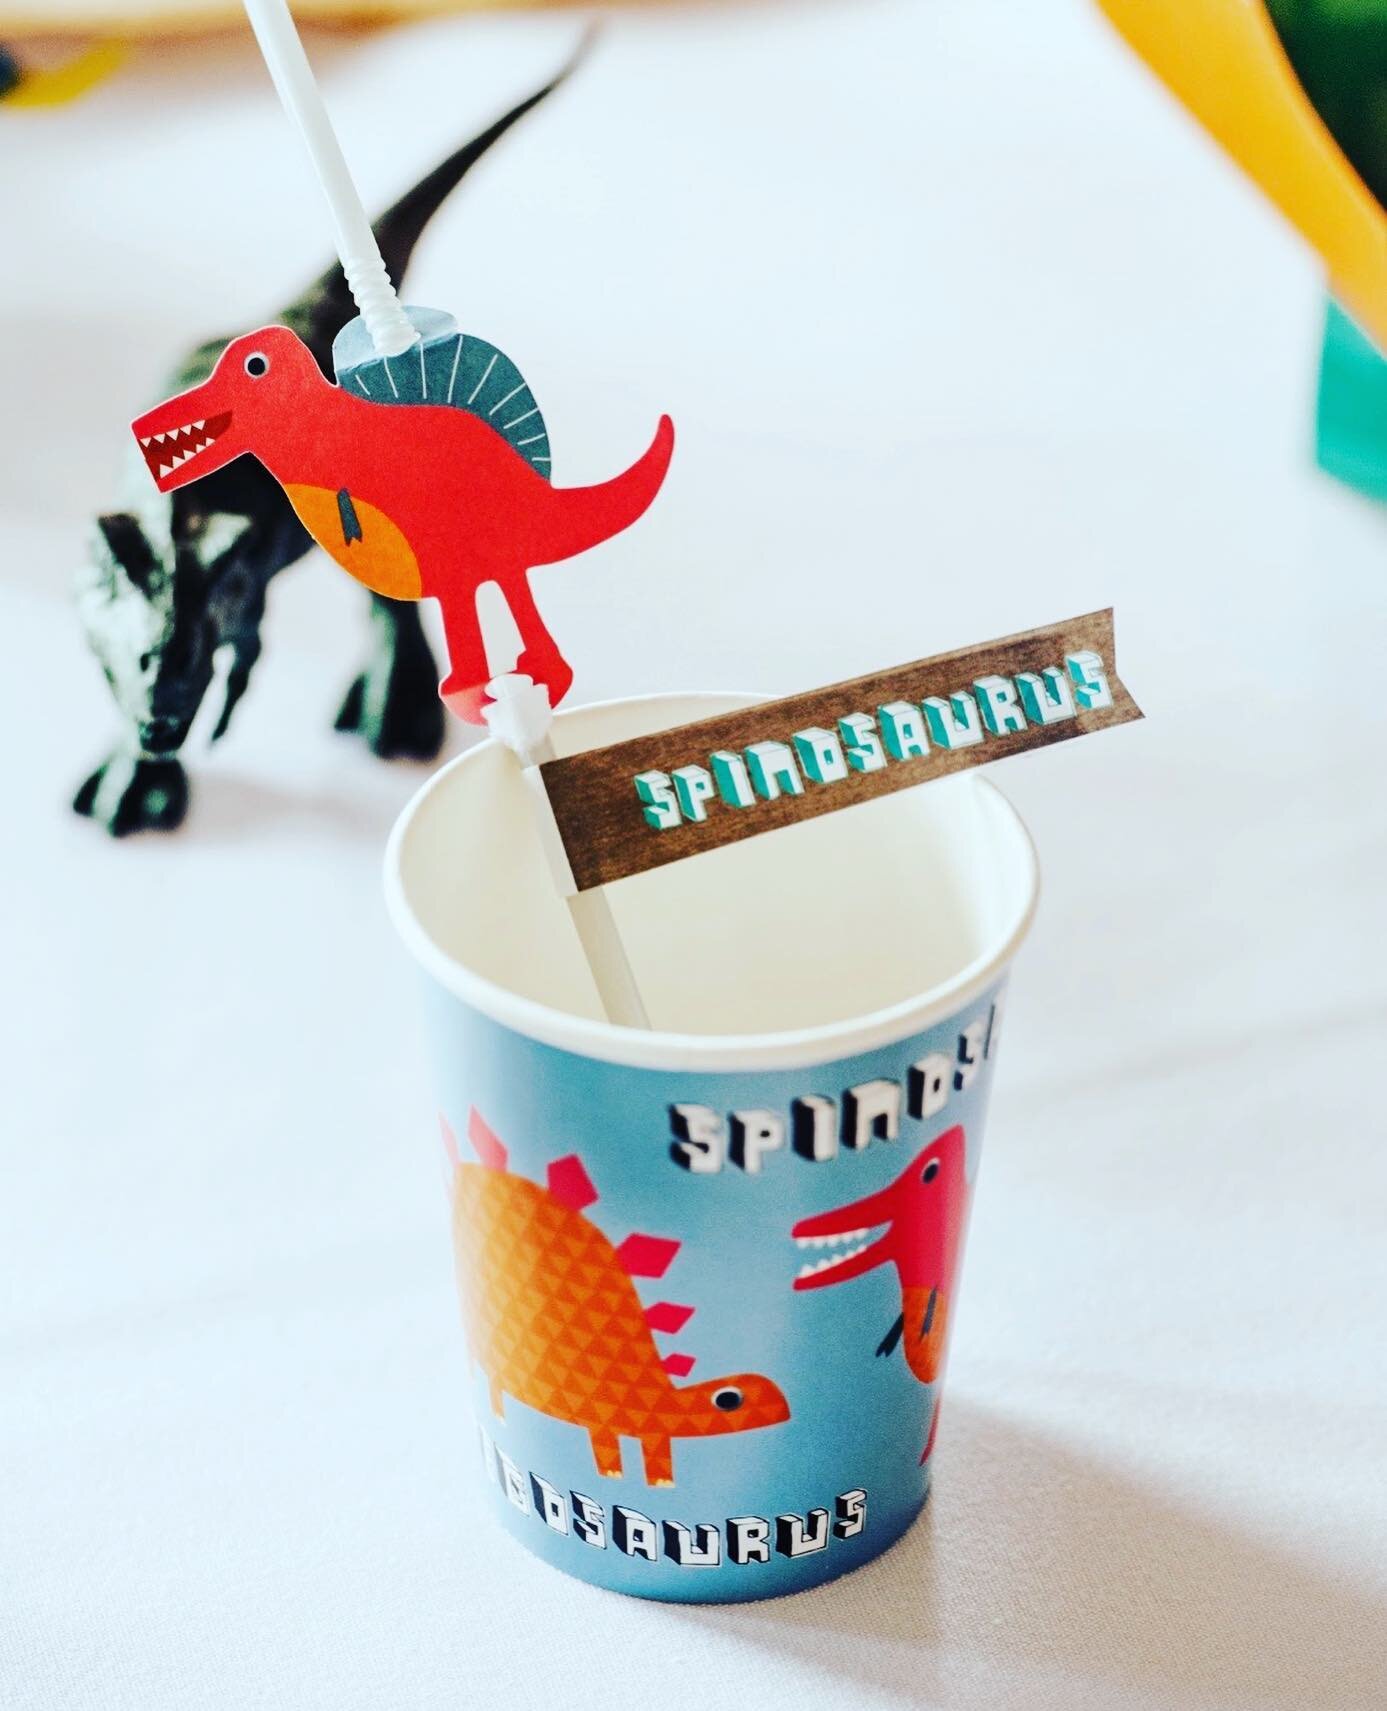 It&rsquo;s all in the detail. Cute dinosaur straws with flag details to match the dinosaur cups. 🦕